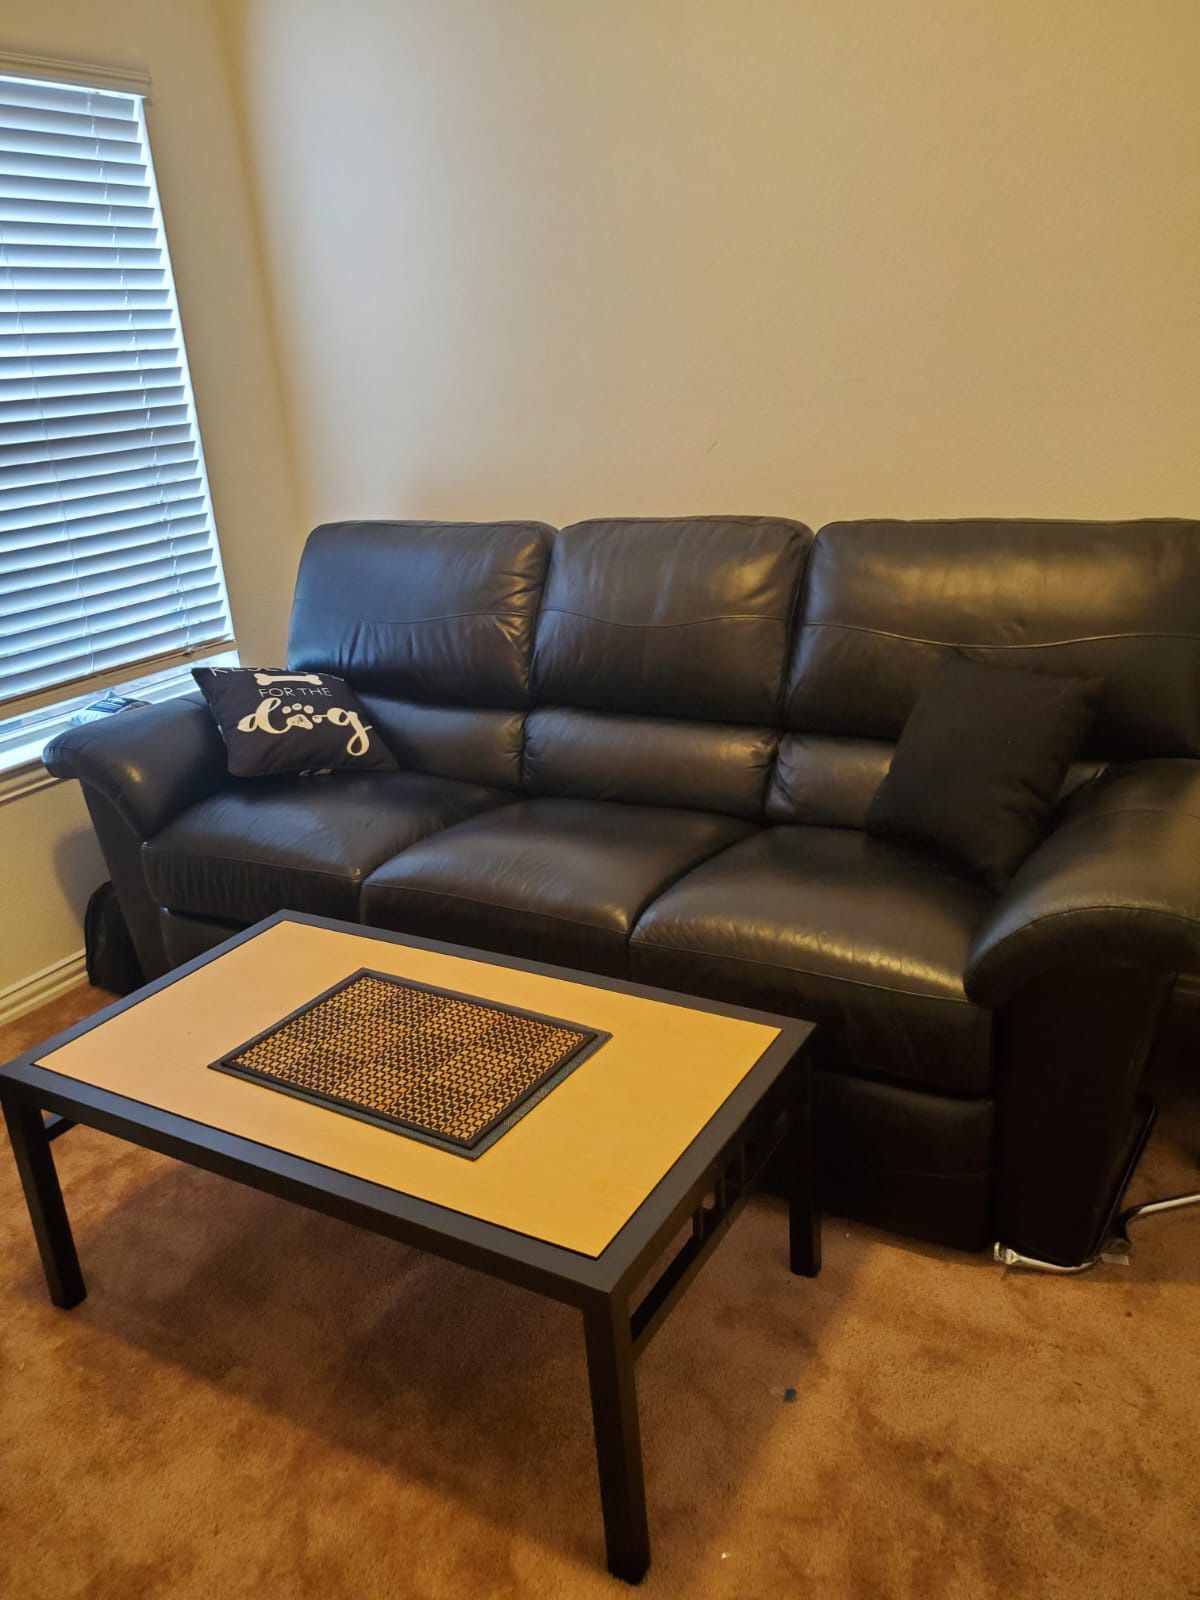 LazyBoy Sofa And Recliner 